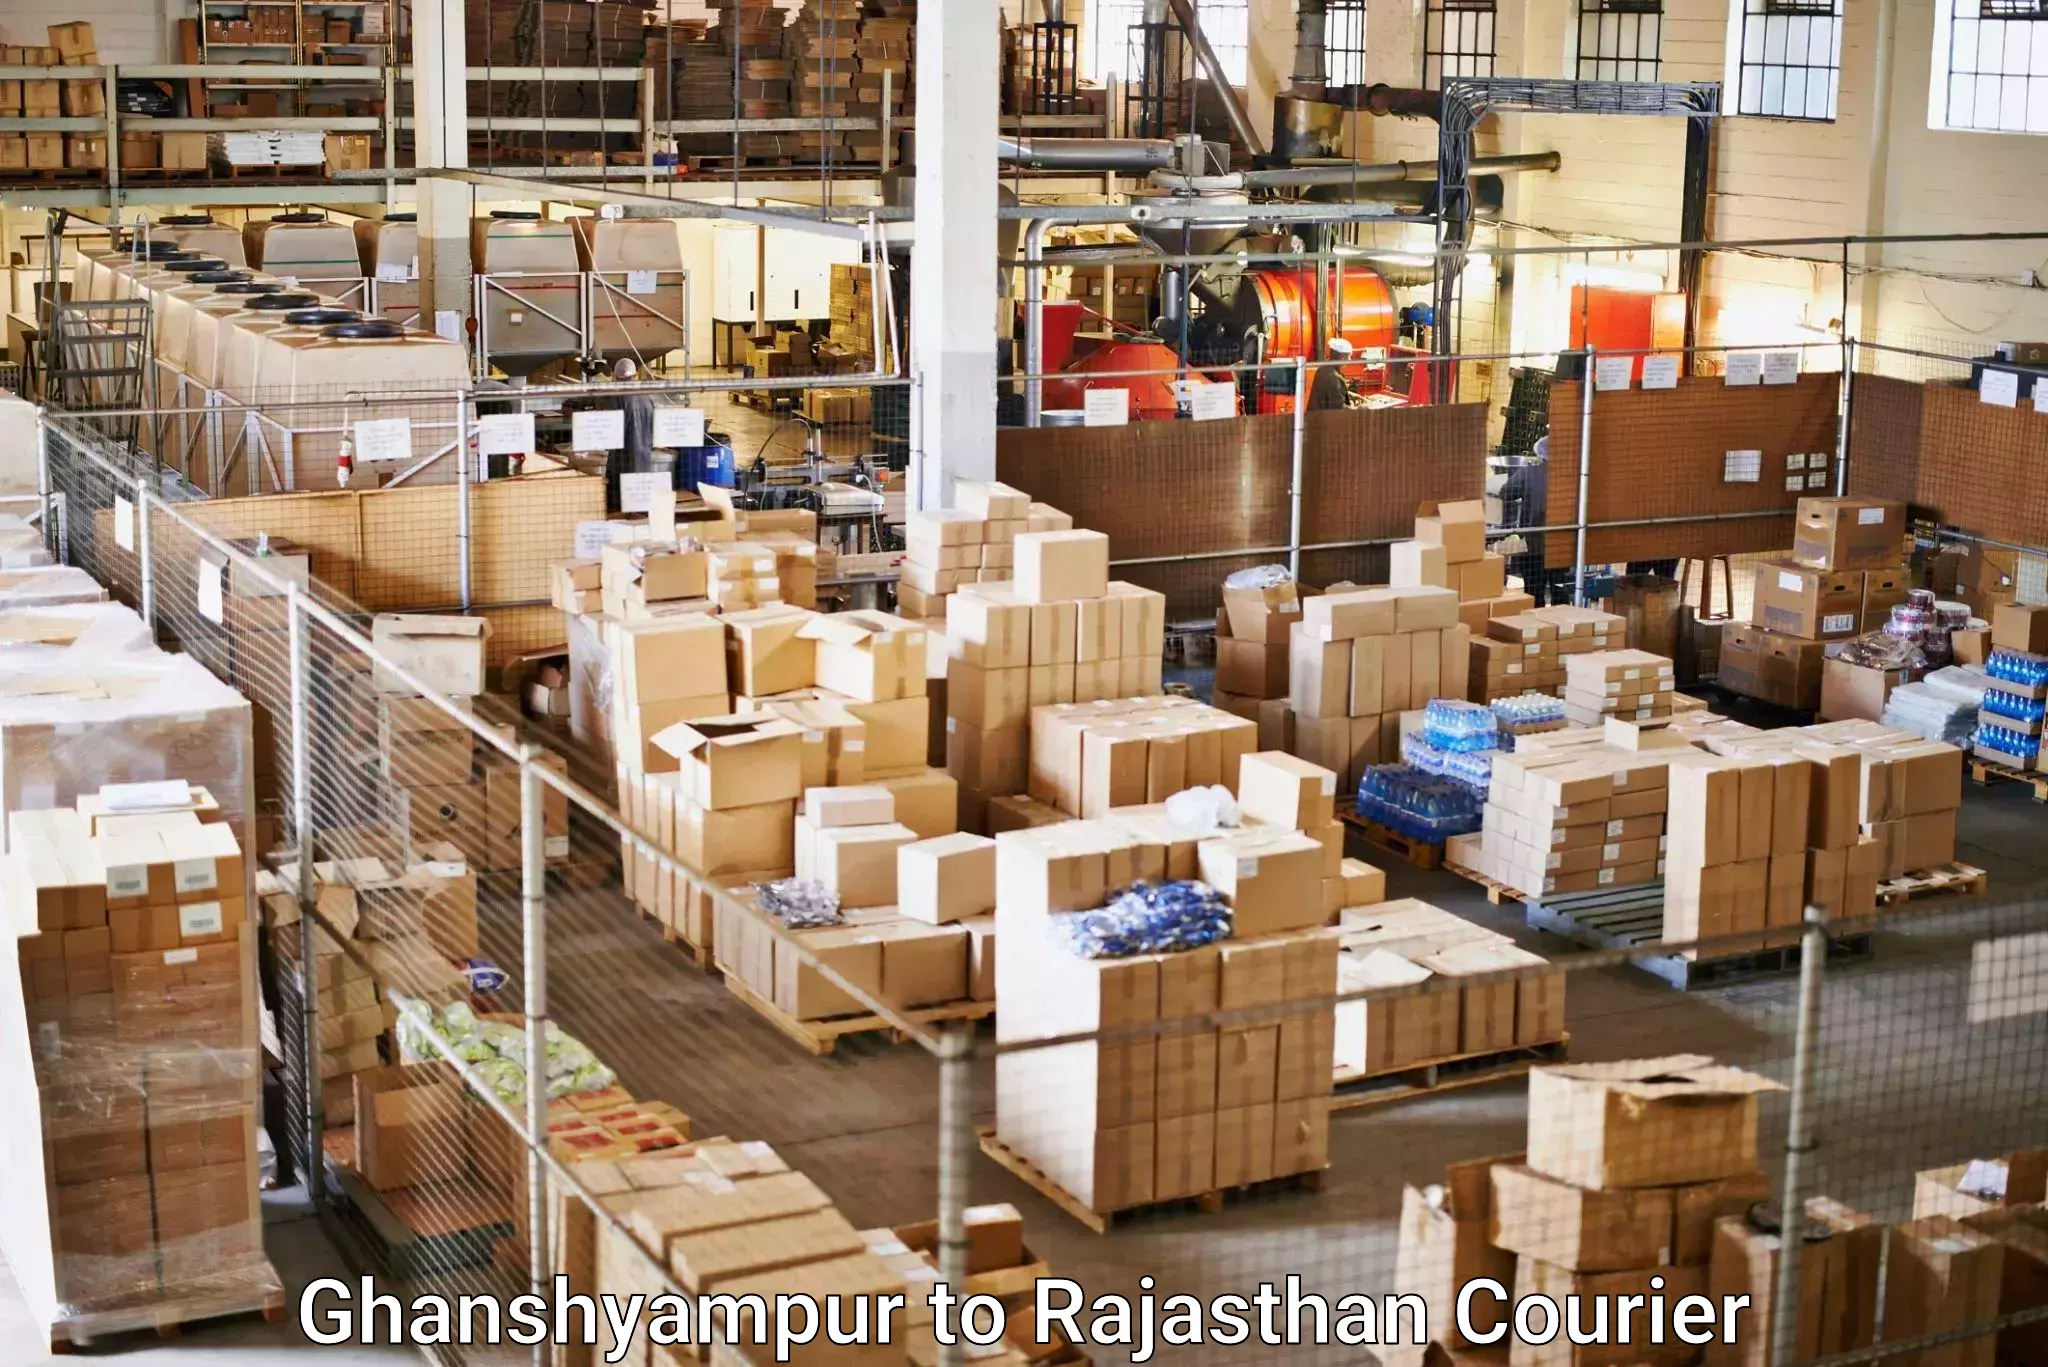 Express mail solutions Ghanshyampur to Srimadhopur